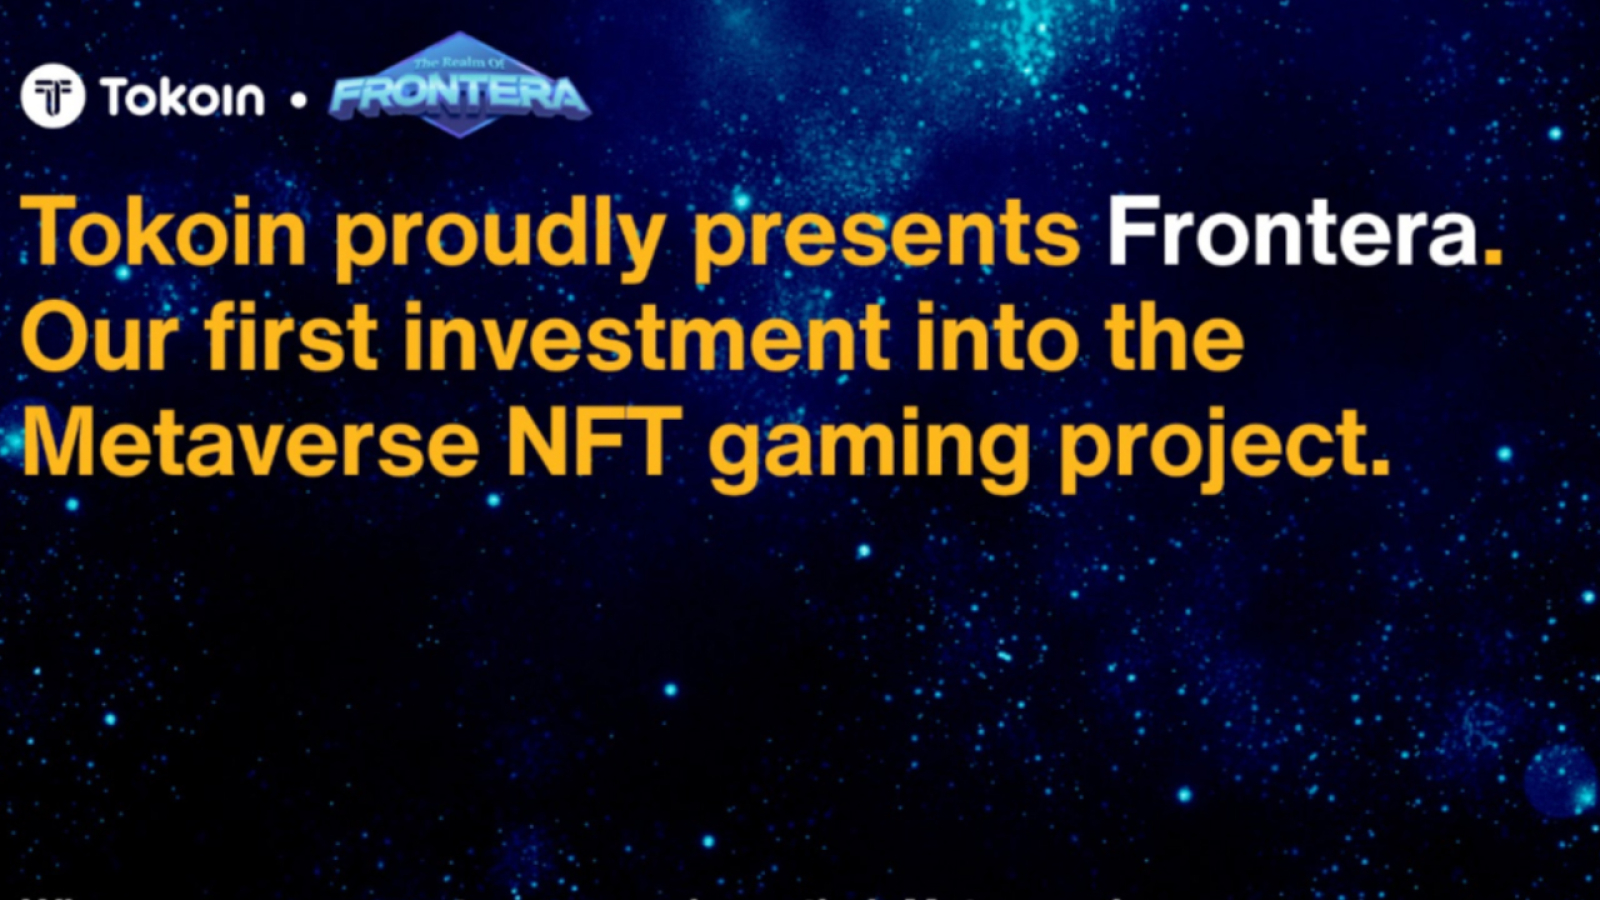 Tokoin Proudly Presents FRONTERA, Our First Investment Into the Metaverse NFT Gaming Project